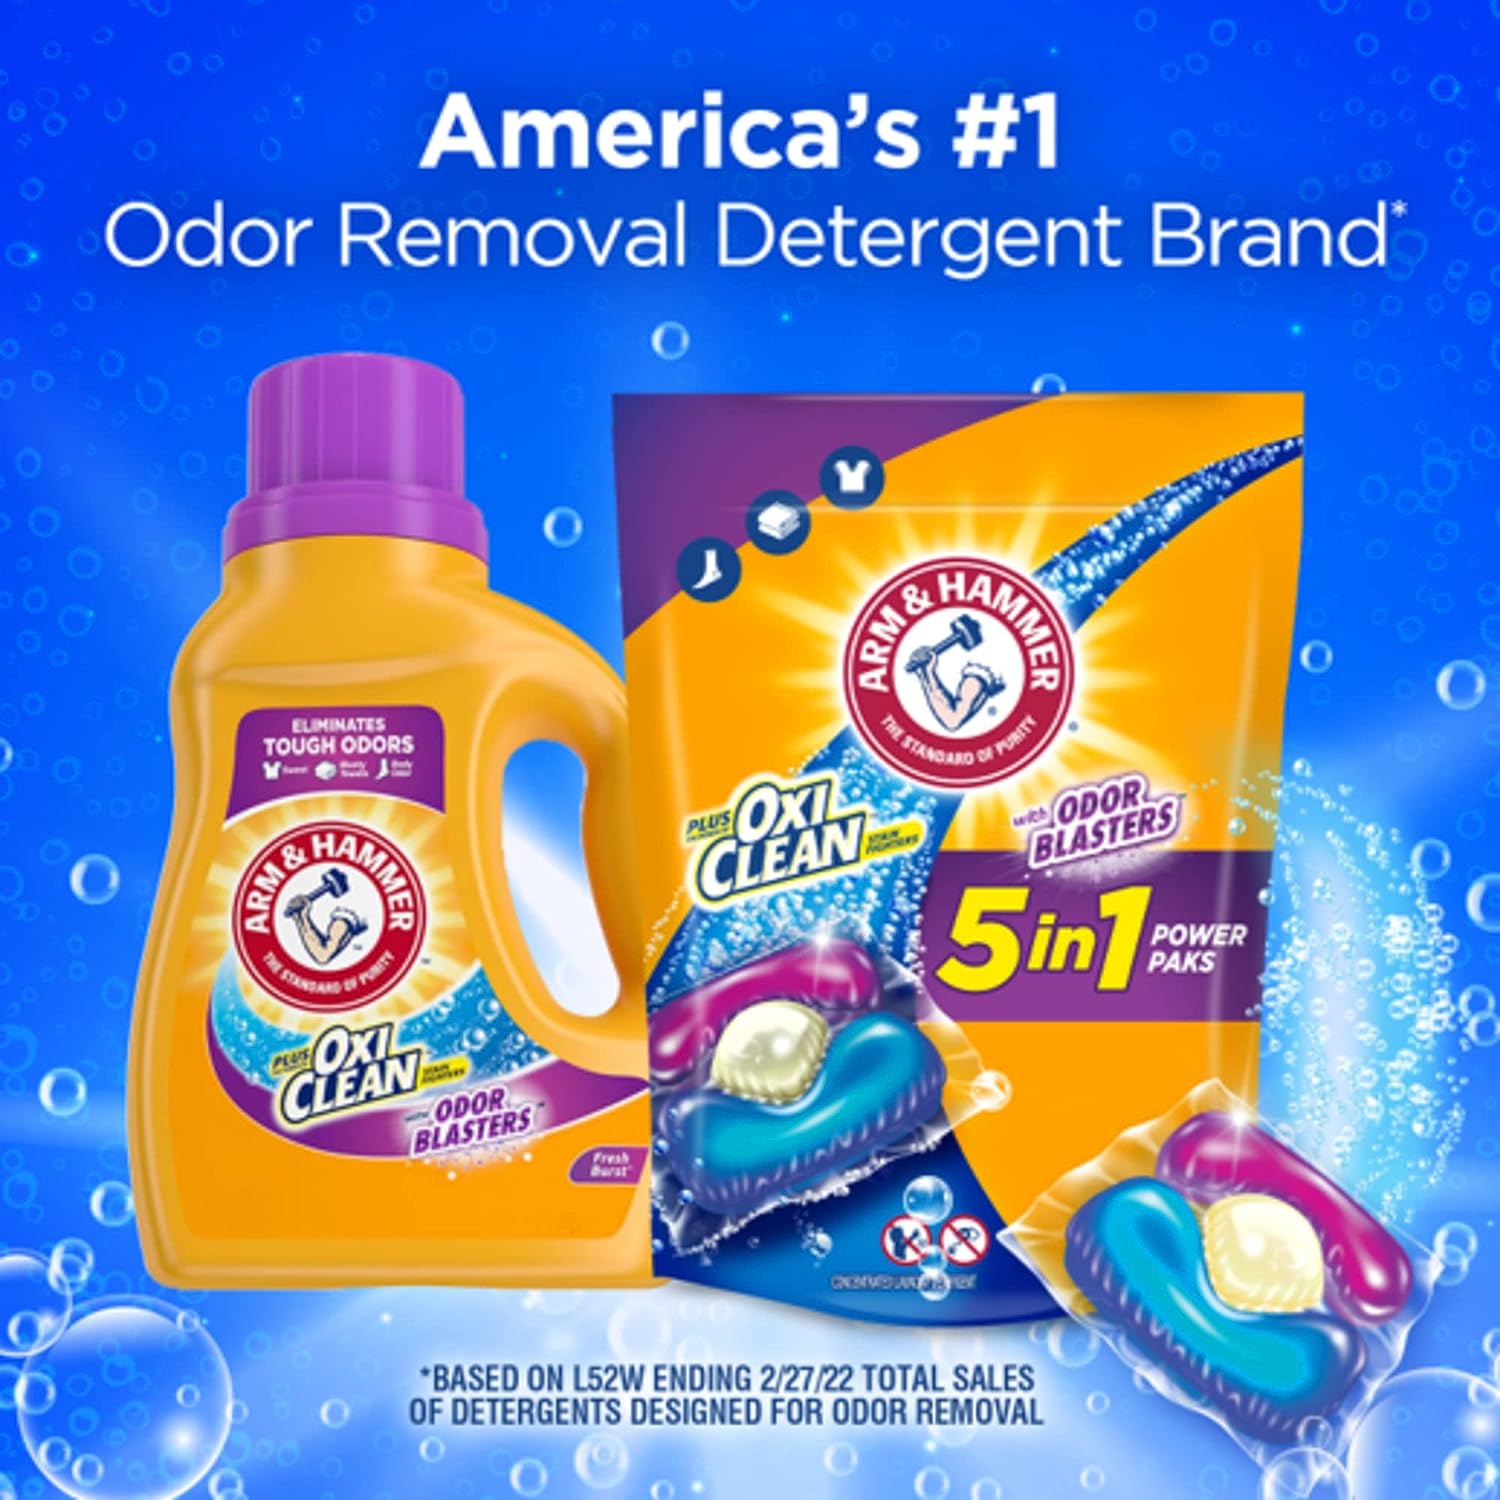 Arm & Hammer Plus OxiClean With Odor Blasters Laundry Detergent 5-IN-1 Power Paks, 42CT (Packaging may vary) : Health & Household